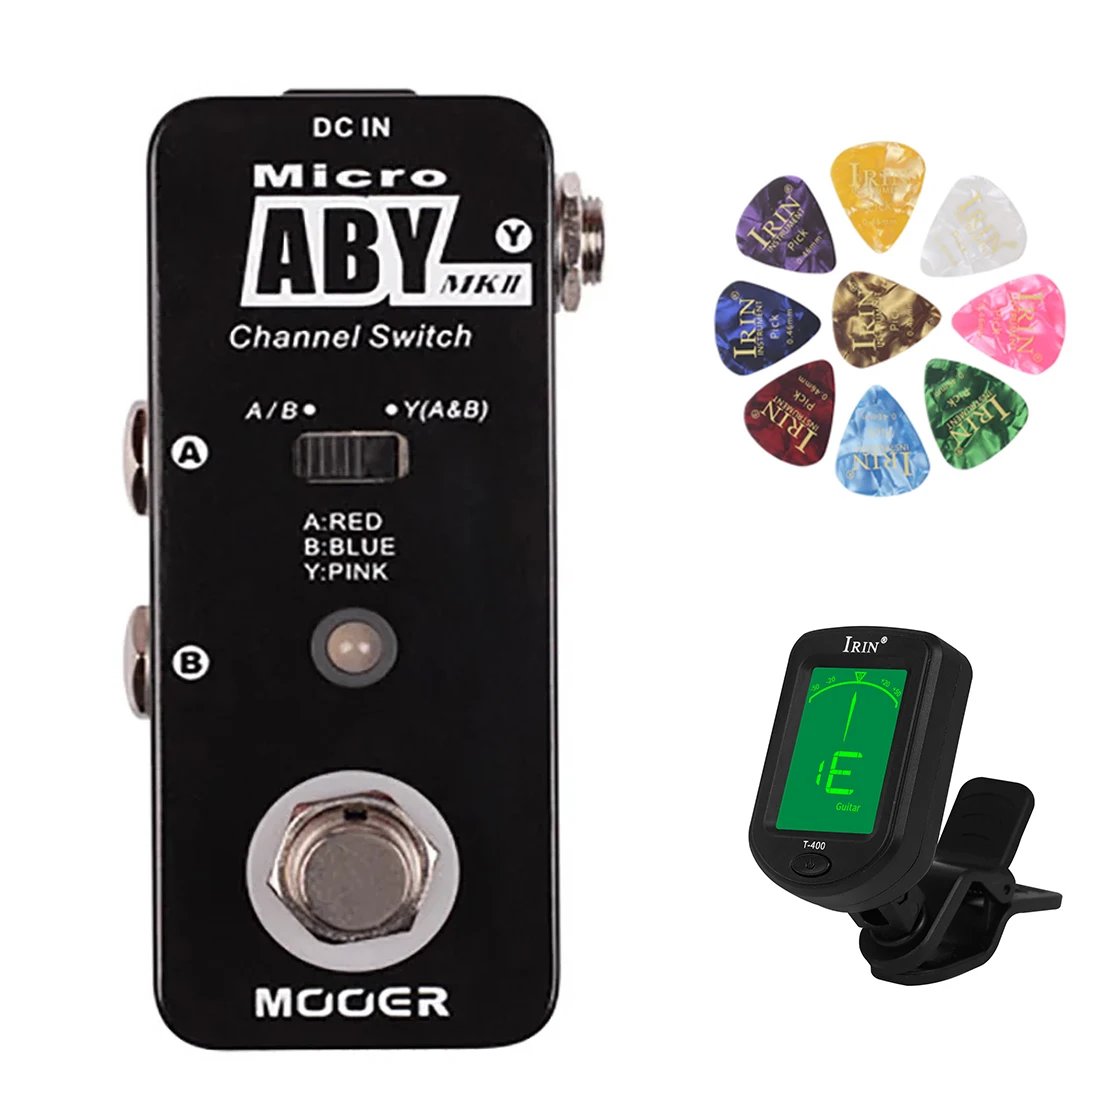 

MOOER ABY MKII Guitar Effect Pedal with True Bypass Full Metal Shell Mini Channel Switch Guitar Pedal Guitar Accessories